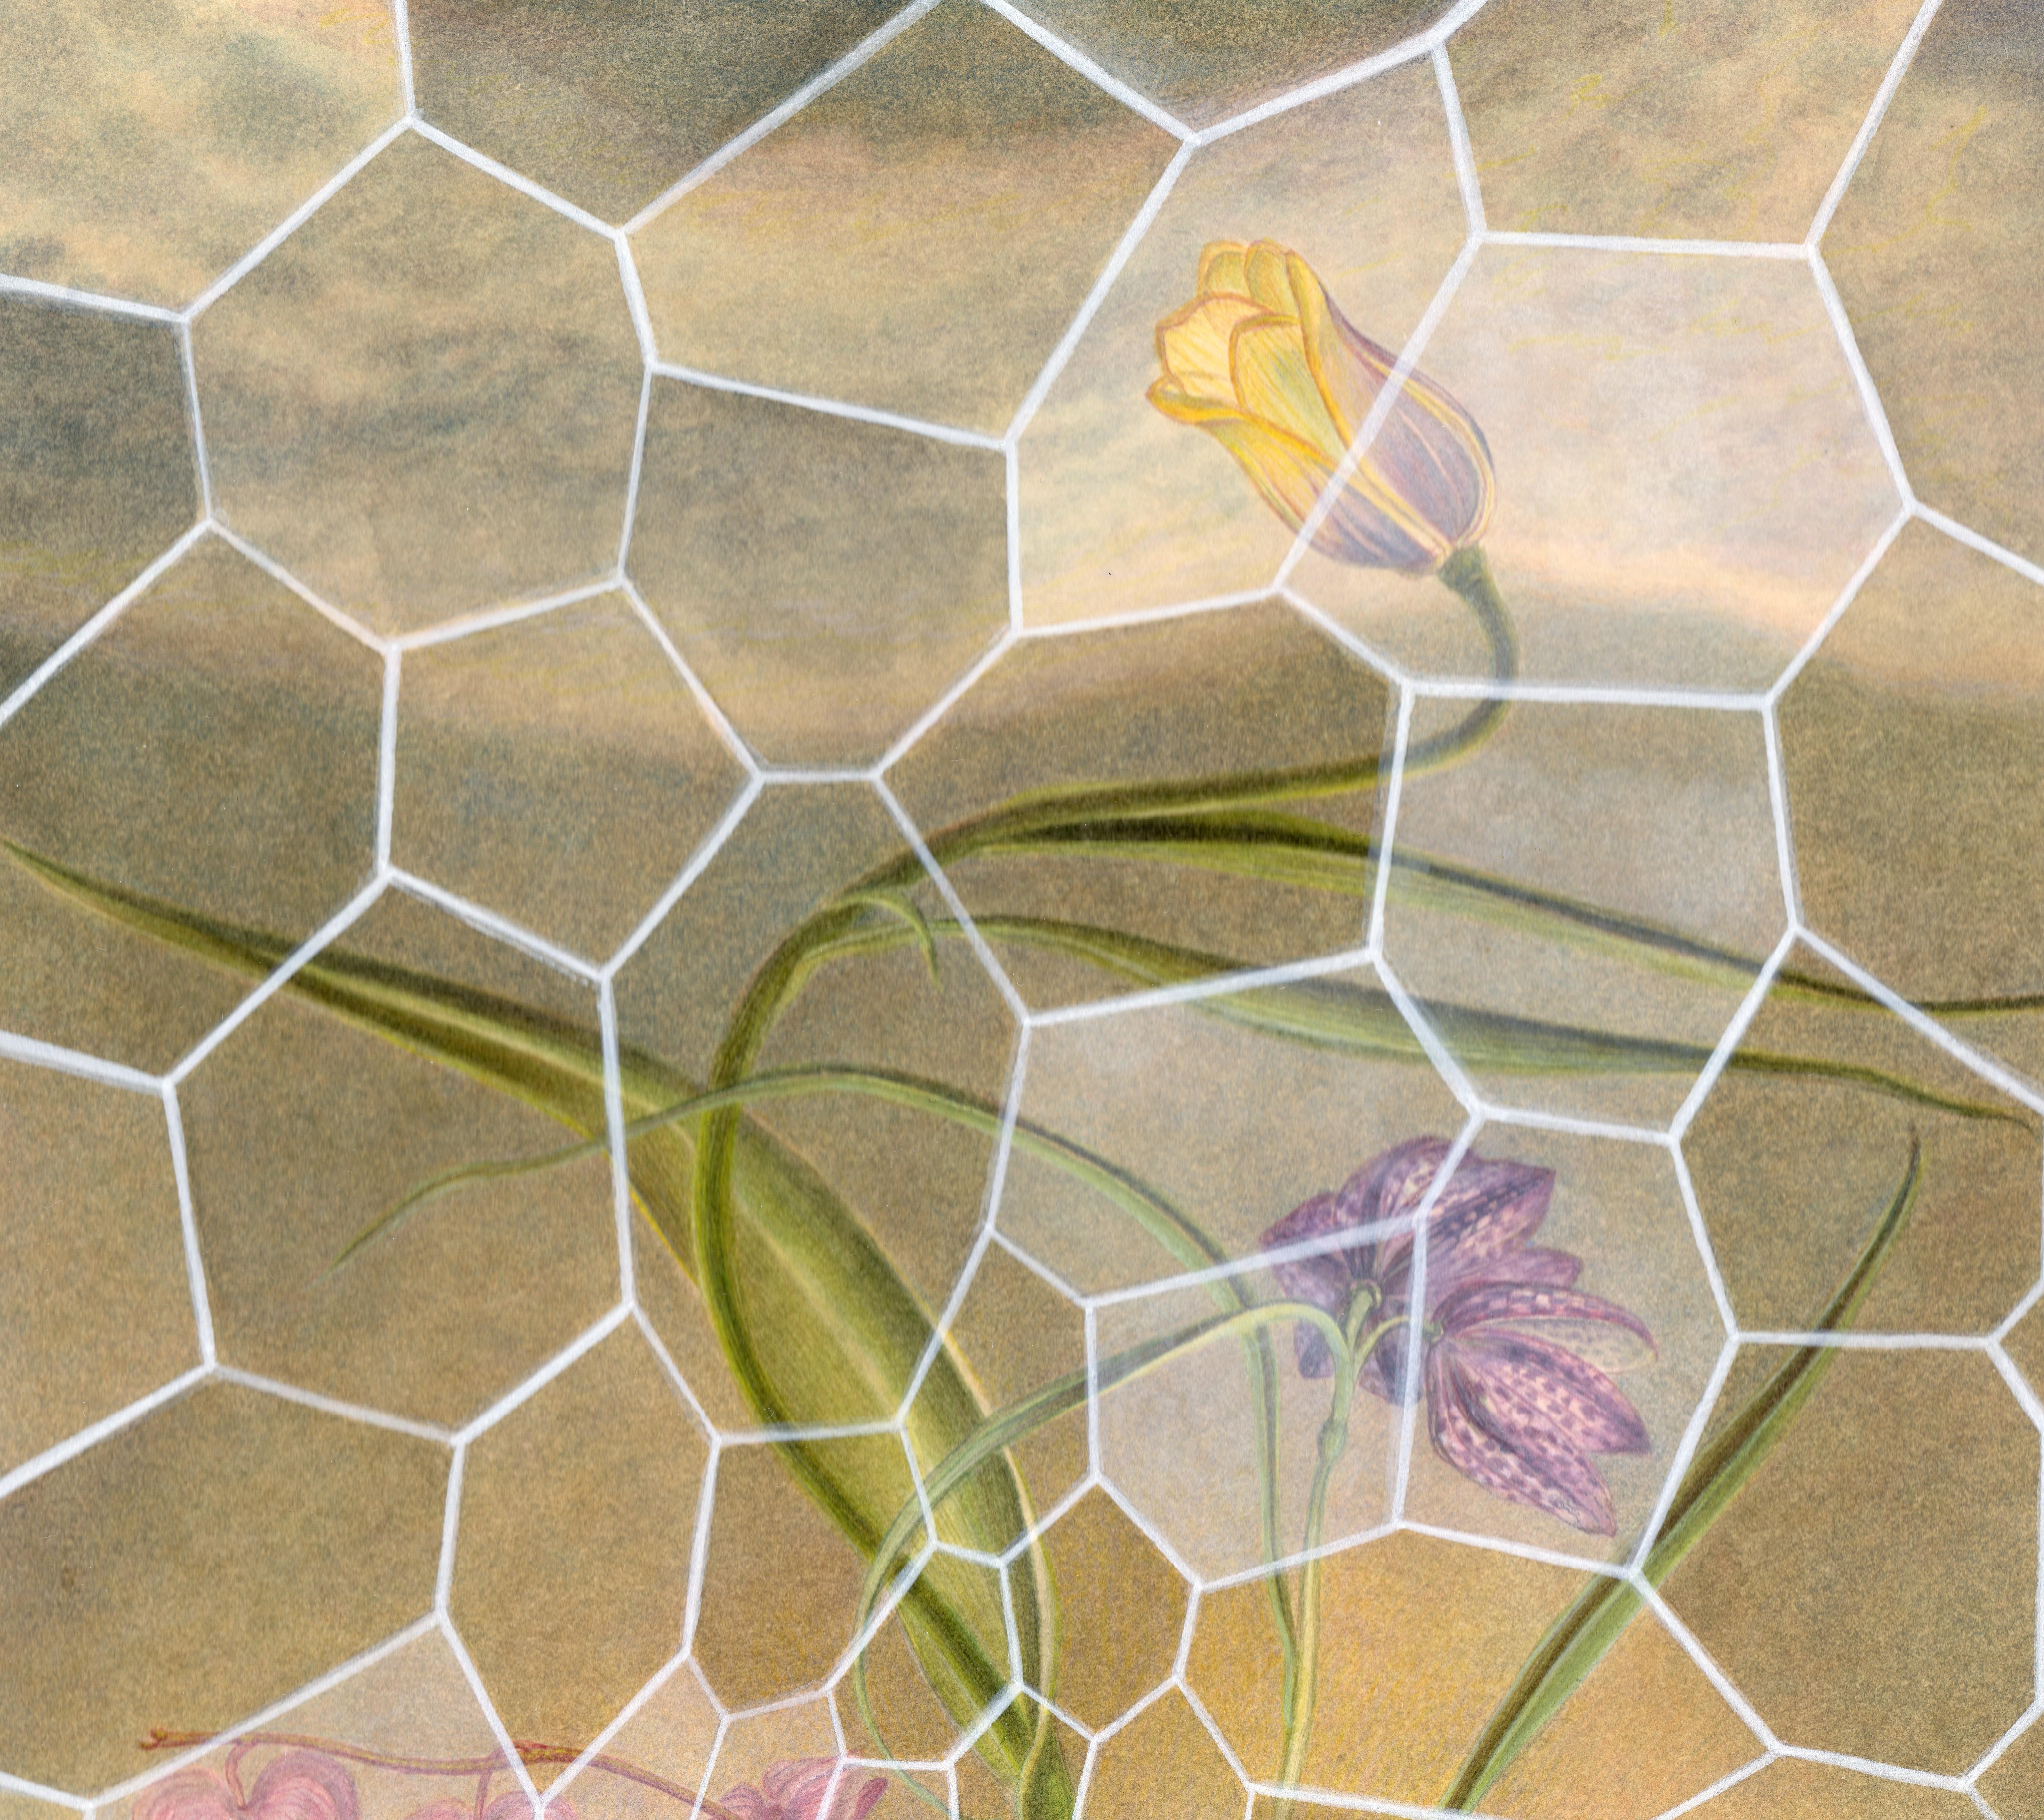 Garden - Botanical Watercolor with Muted Pinks, Greens, Browns - Art by Christina Haglid